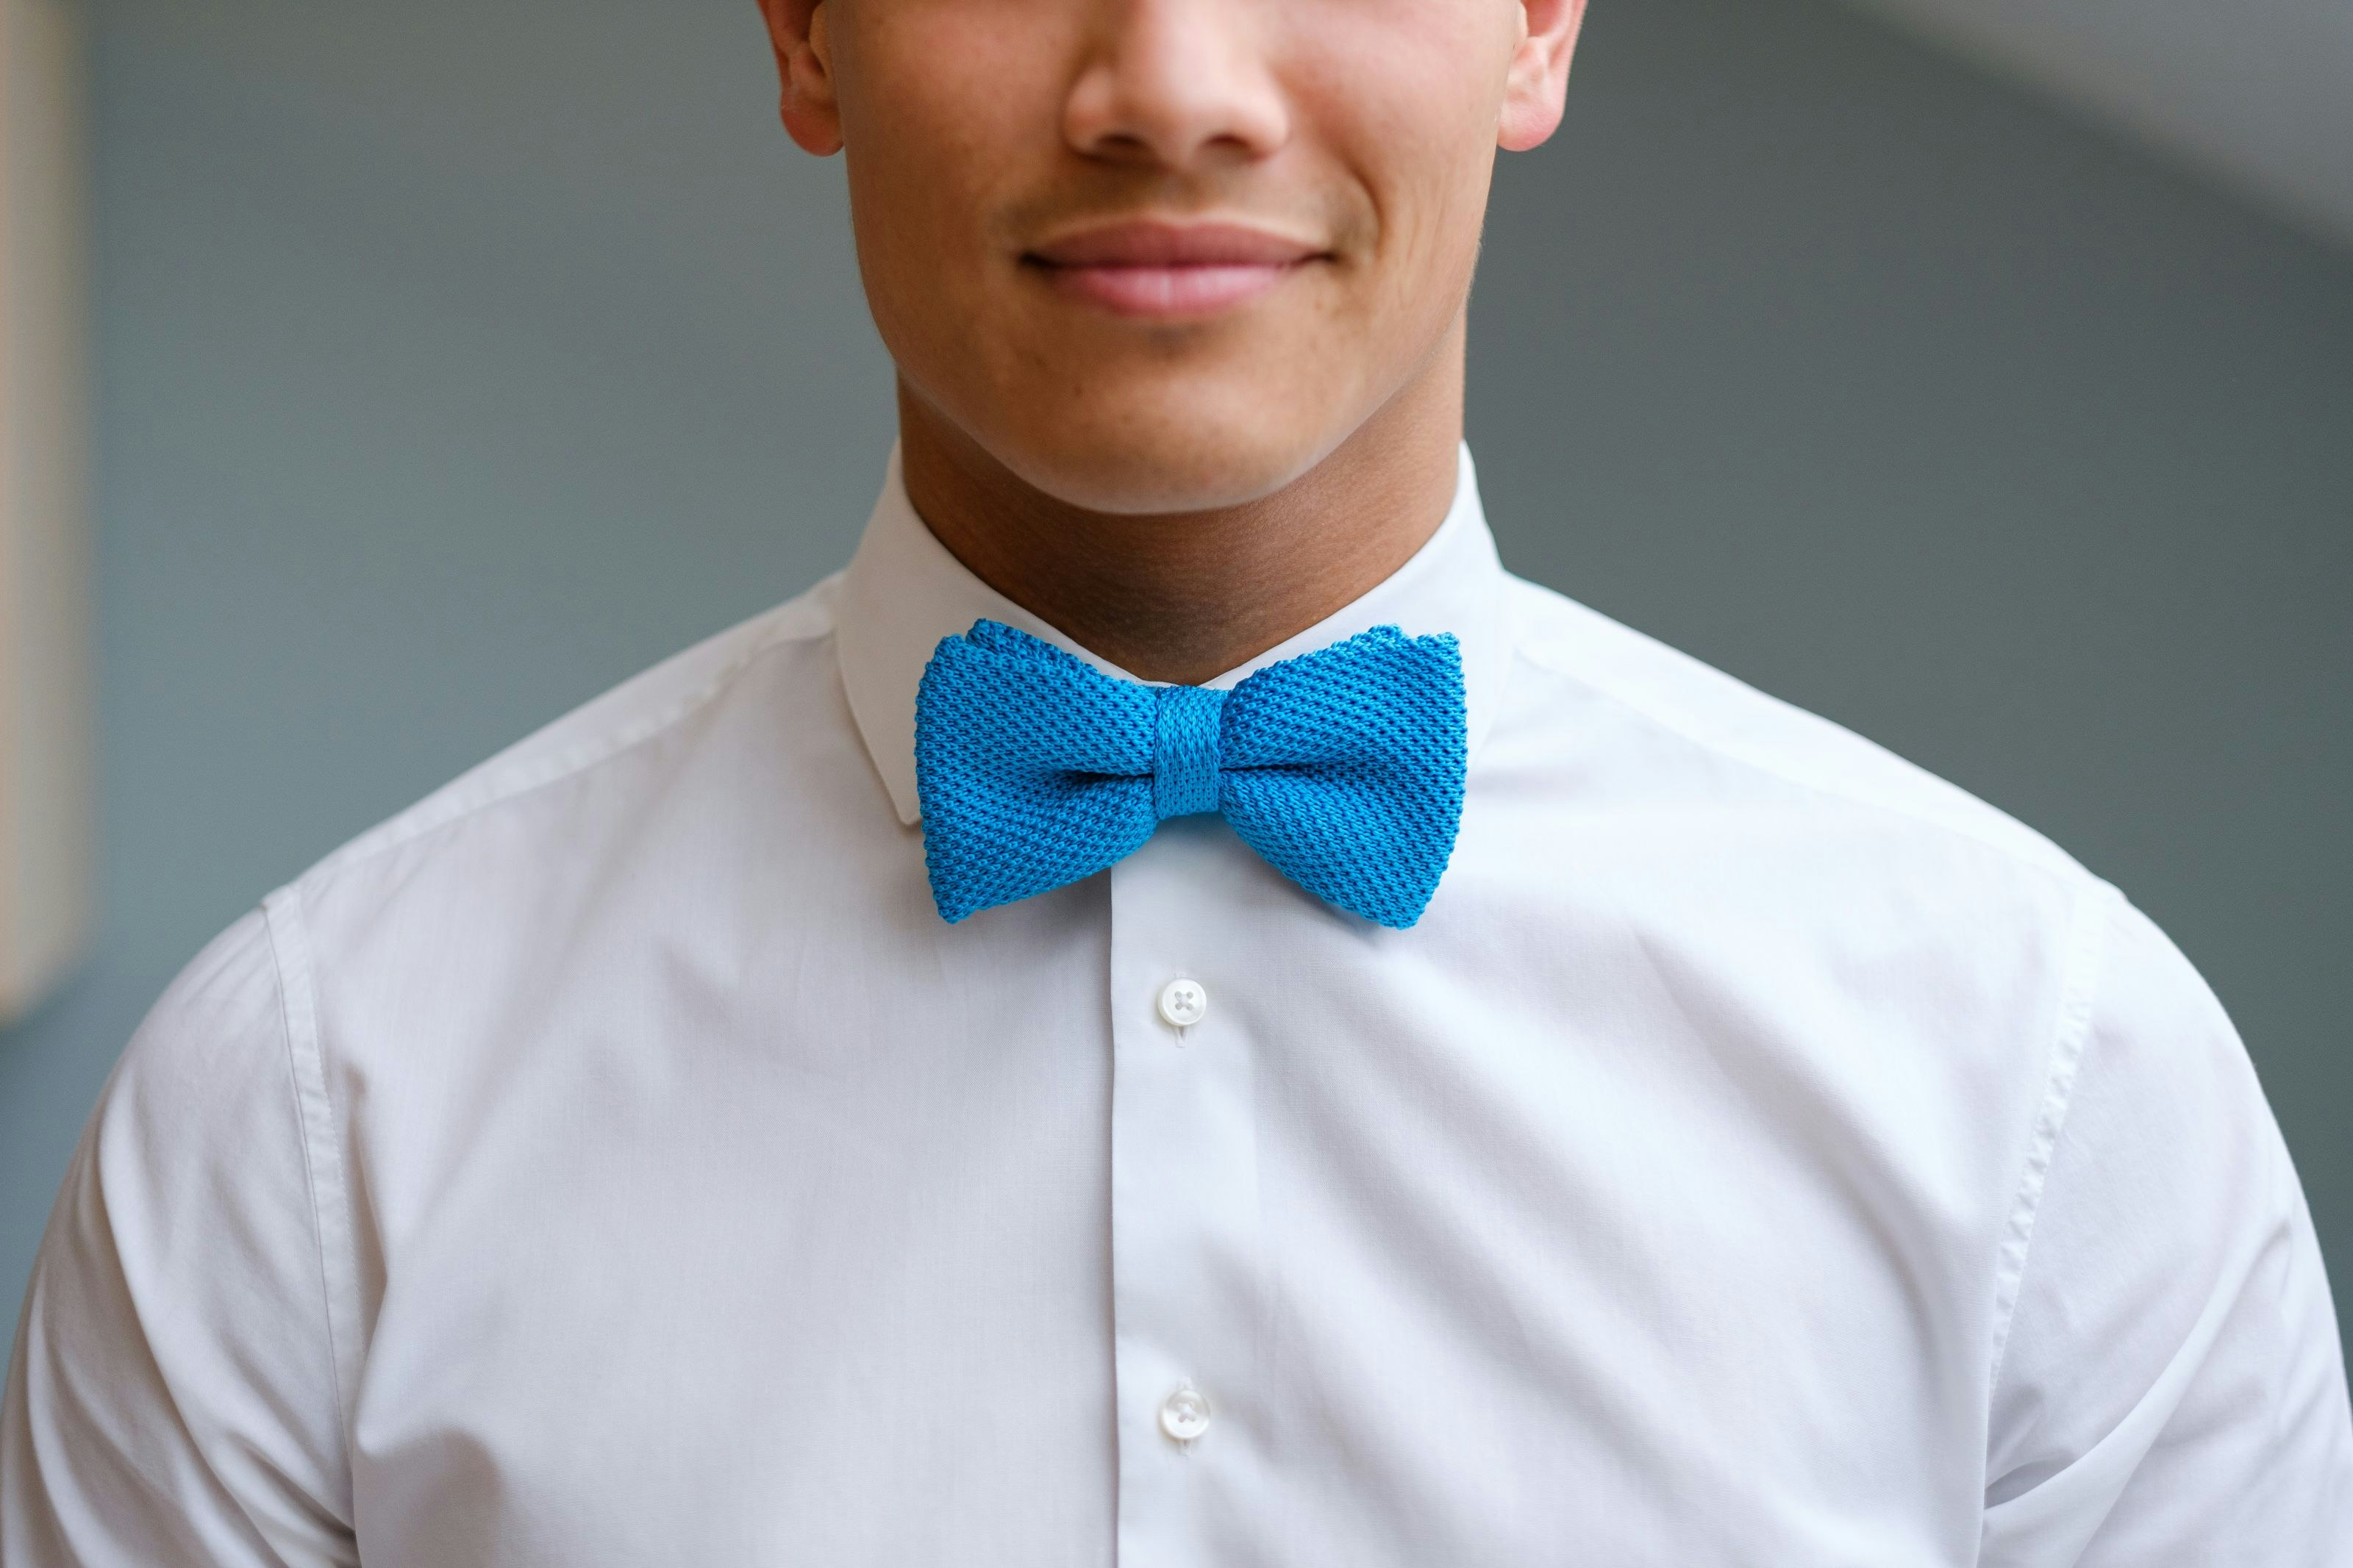 Jonathan Pham's face with a blue bow tie, founder of We Invest Real Estate